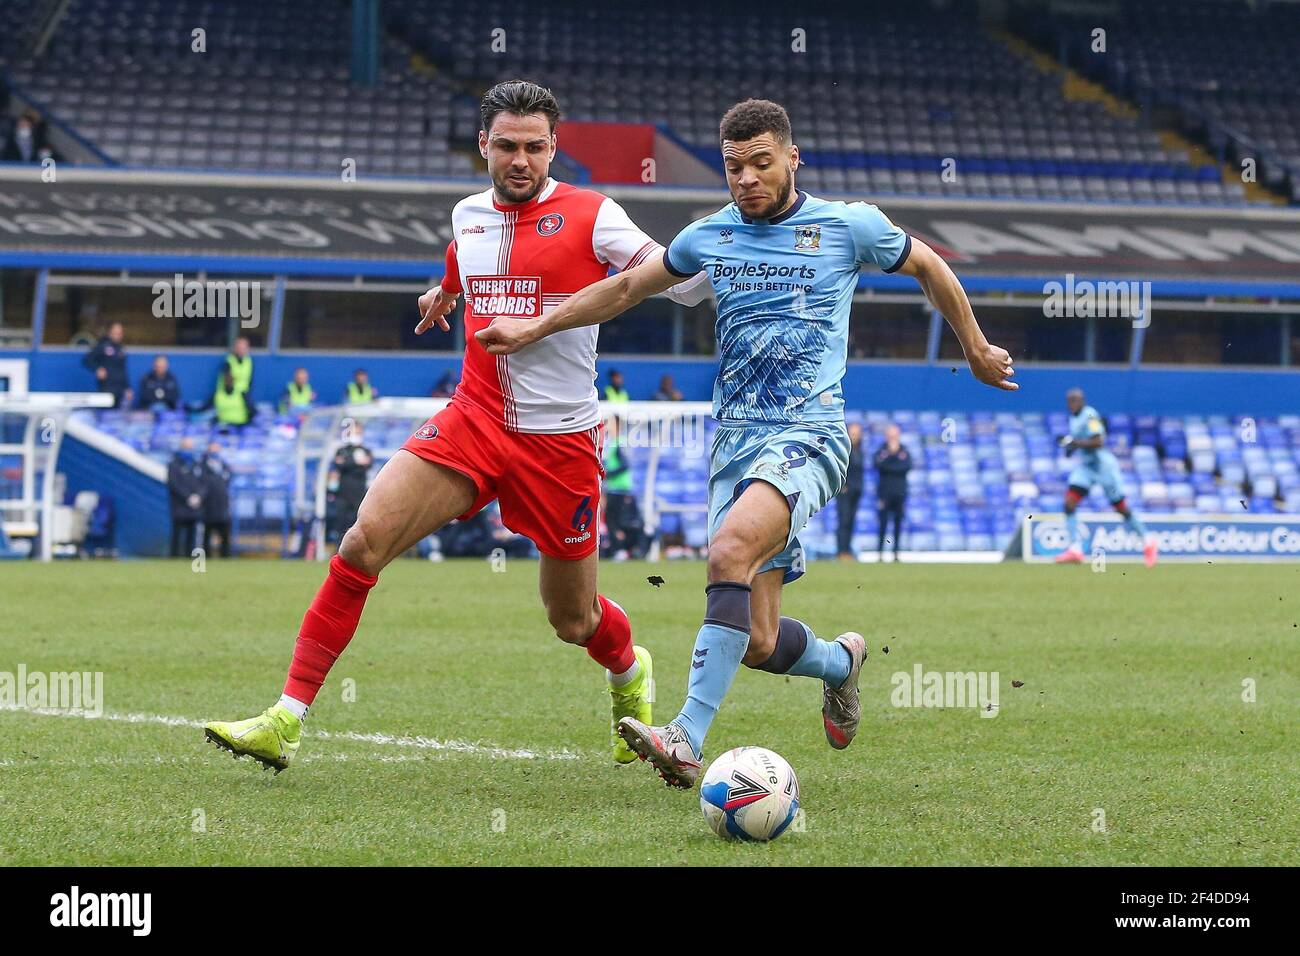 Birmingham, UK. 20th Mar, 2021. Maxime Biamou #9 of Coventry City dribbles the ball whilst under pressure from Ryan Tafazolli #6 of Wycombe Wanderers in Birmingham, UK on 3/20/2021. (Photo by Simon Bissett/News Images/Sipa USA) Credit: Sipa USA/Alamy Live News Stock Photo